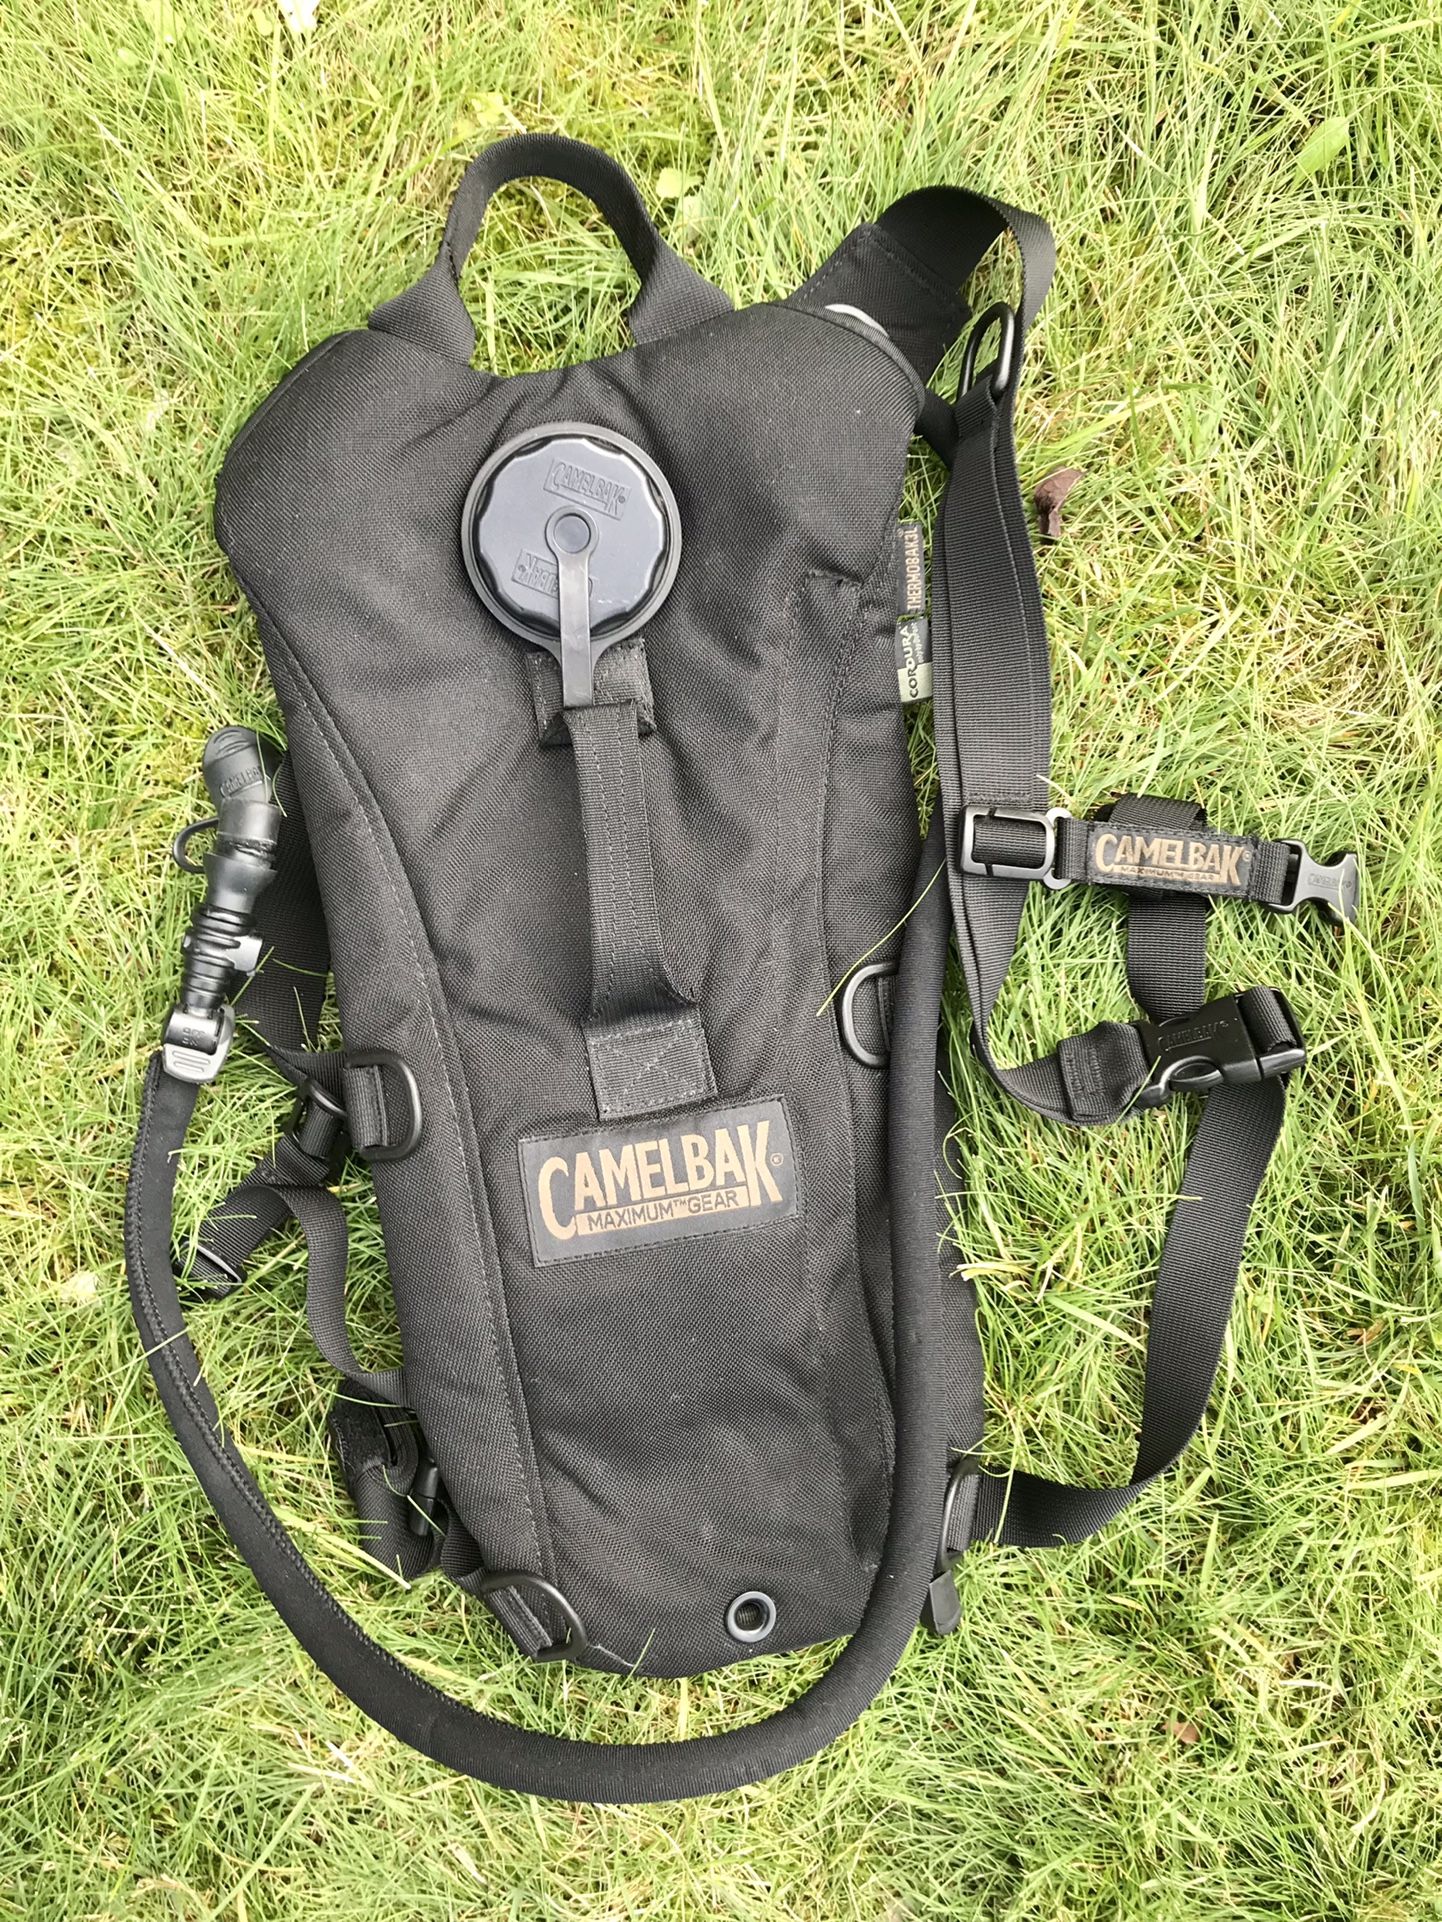 CamelBak ThermoBak Hydration Pack (3 Liters / 100 0unces)